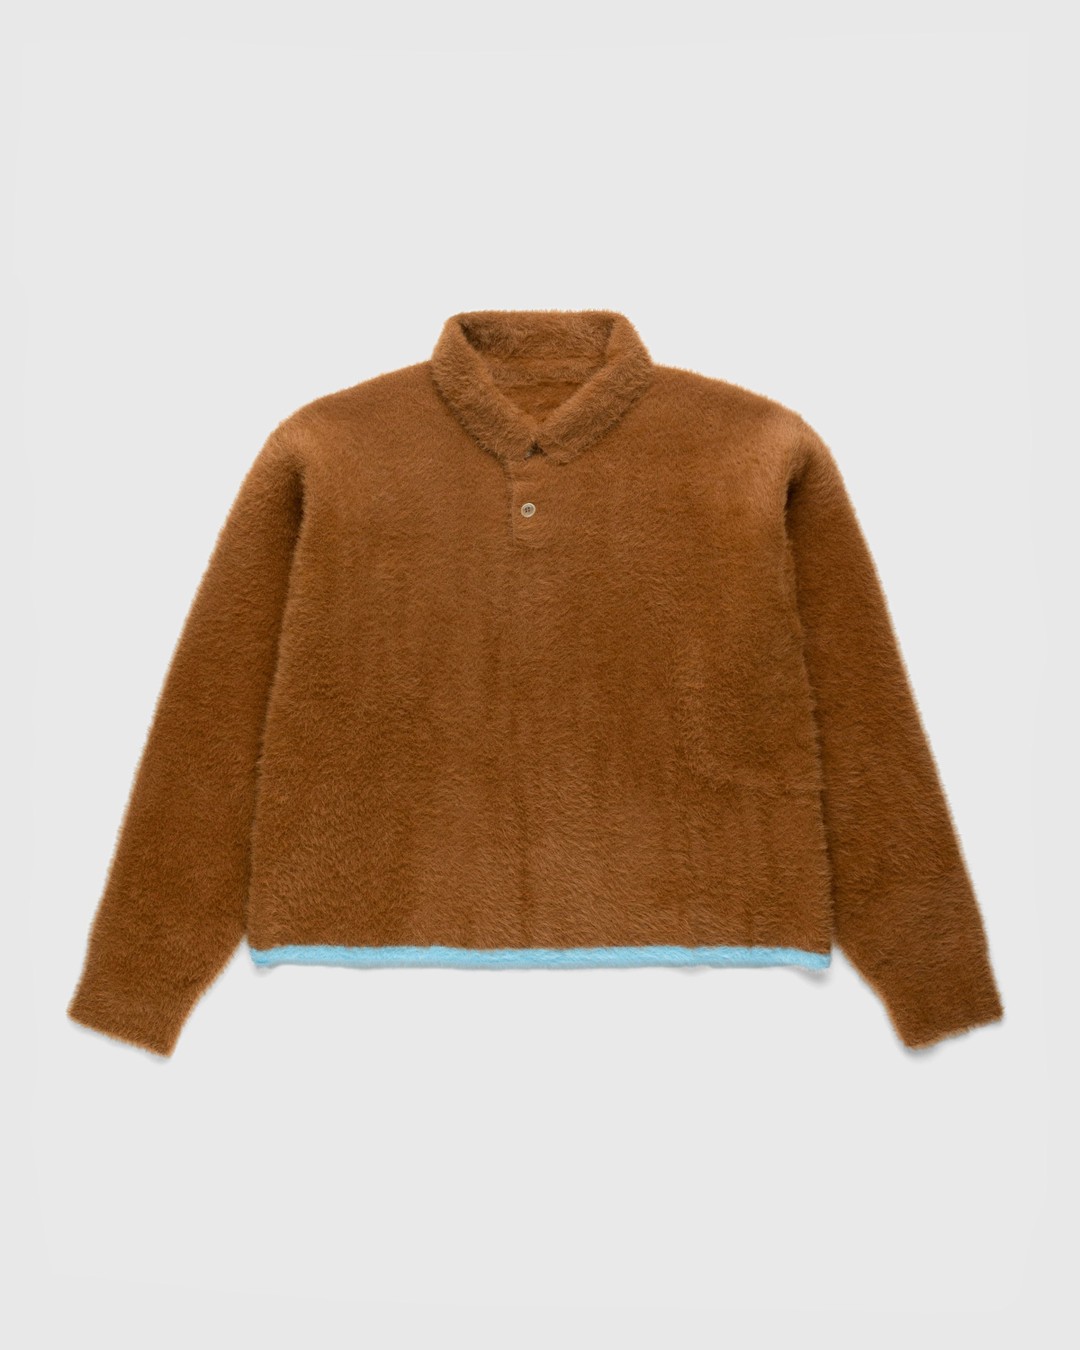 JACQUEMUS – Le Polo Neve Brown - Knitwear - Brown - Image 1